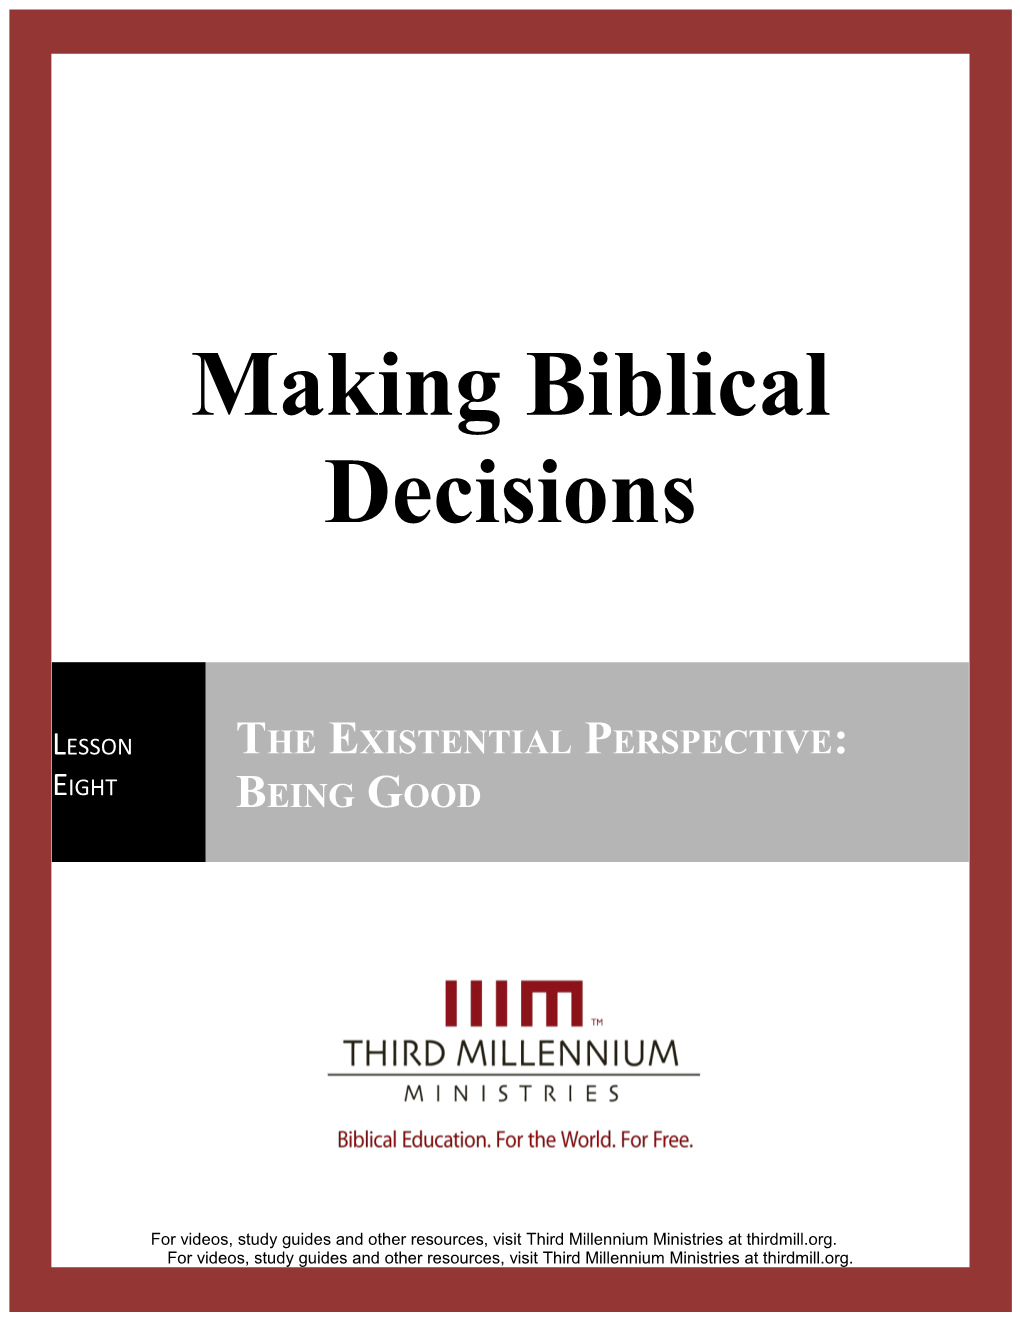 Making Biblical Decisions, Lesson 8